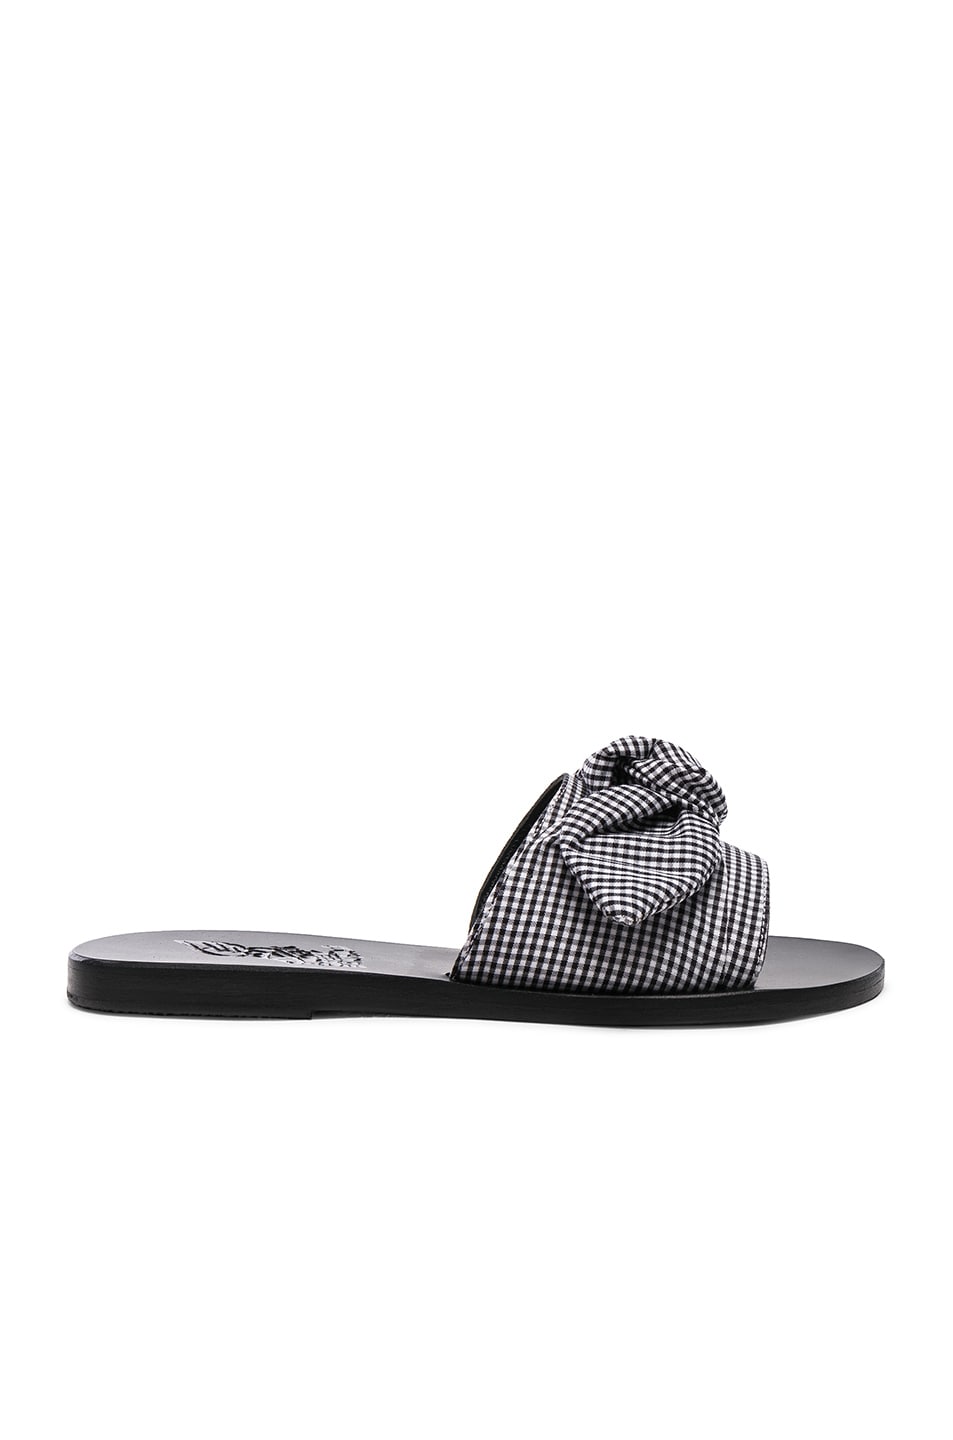 Image 1 of Ancient Greek Sandals Gingham Taygete Bow Sandals in Gingham Black